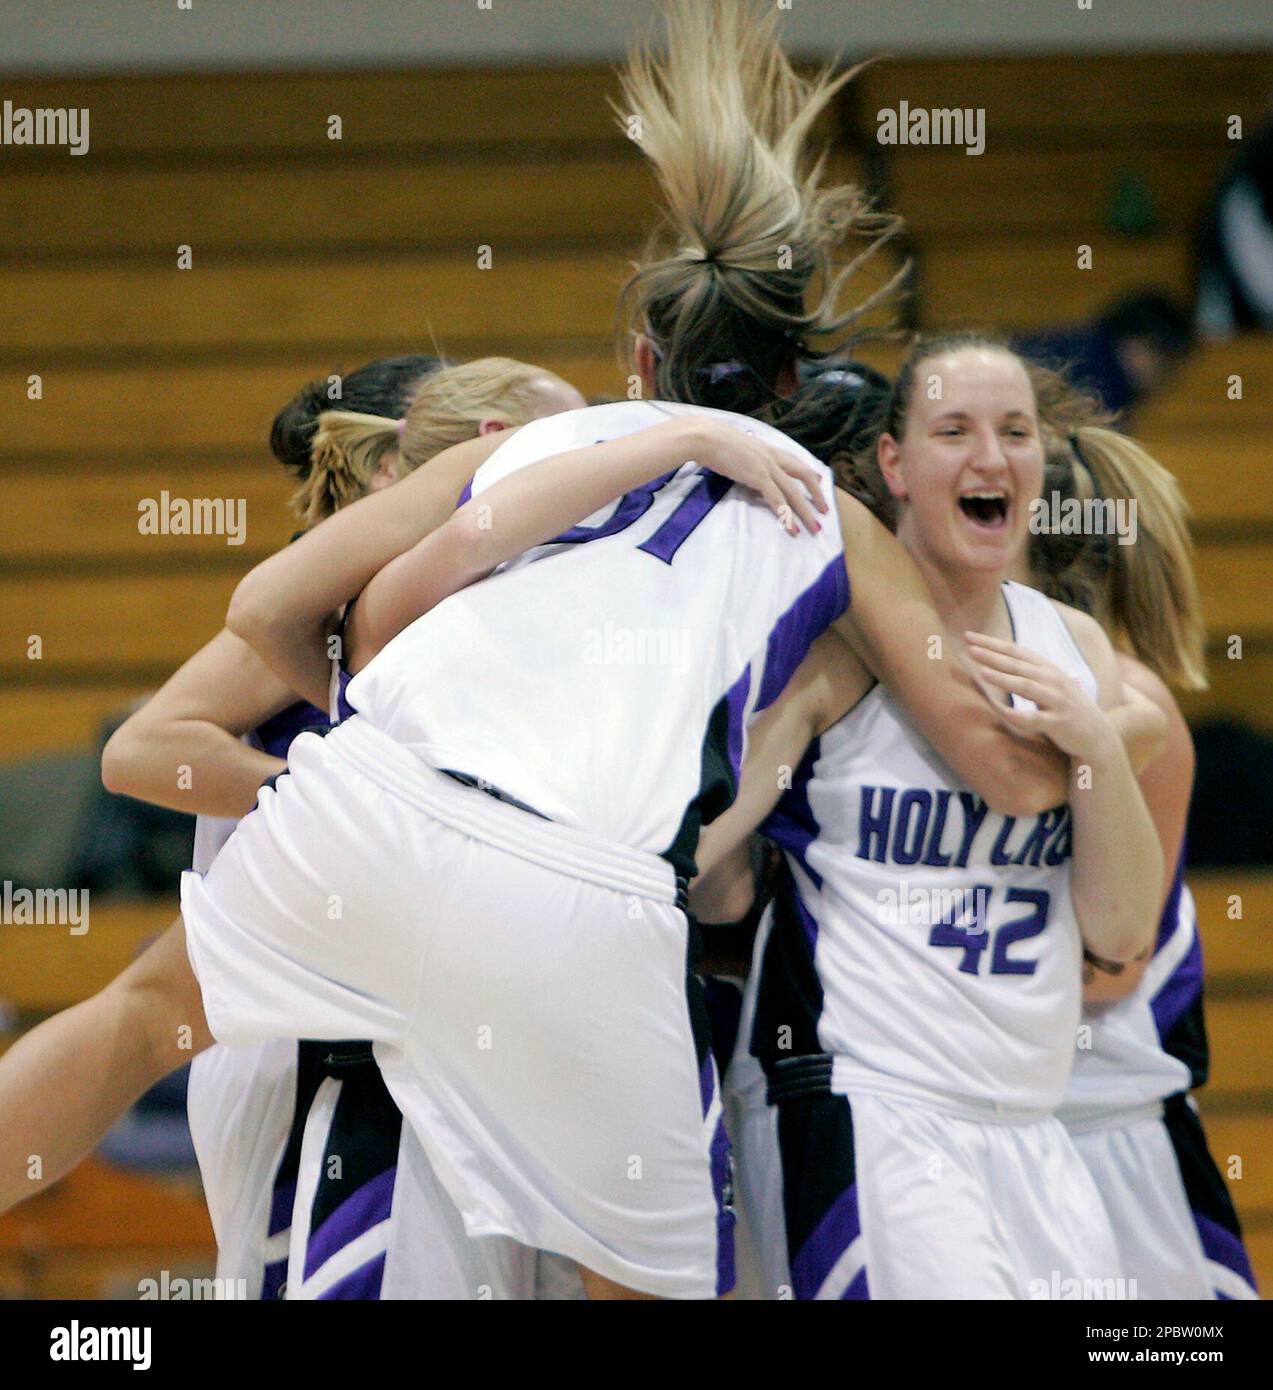 Holy Cross center Ashley Brennan-McBride leaps into the arms of her teammates and forward Kathy Gruzynski, right, at the conclusion of their Patriot League tournament championship basketball game Wednesday, March 7, 2007, in Worcester, Mass. Holy Cross defeated American 56-48 to win the women's Patriot League Championship and an automatic bid in the NCAA tournament. (AP Photo/Greg M. Cooper) Stock Photo